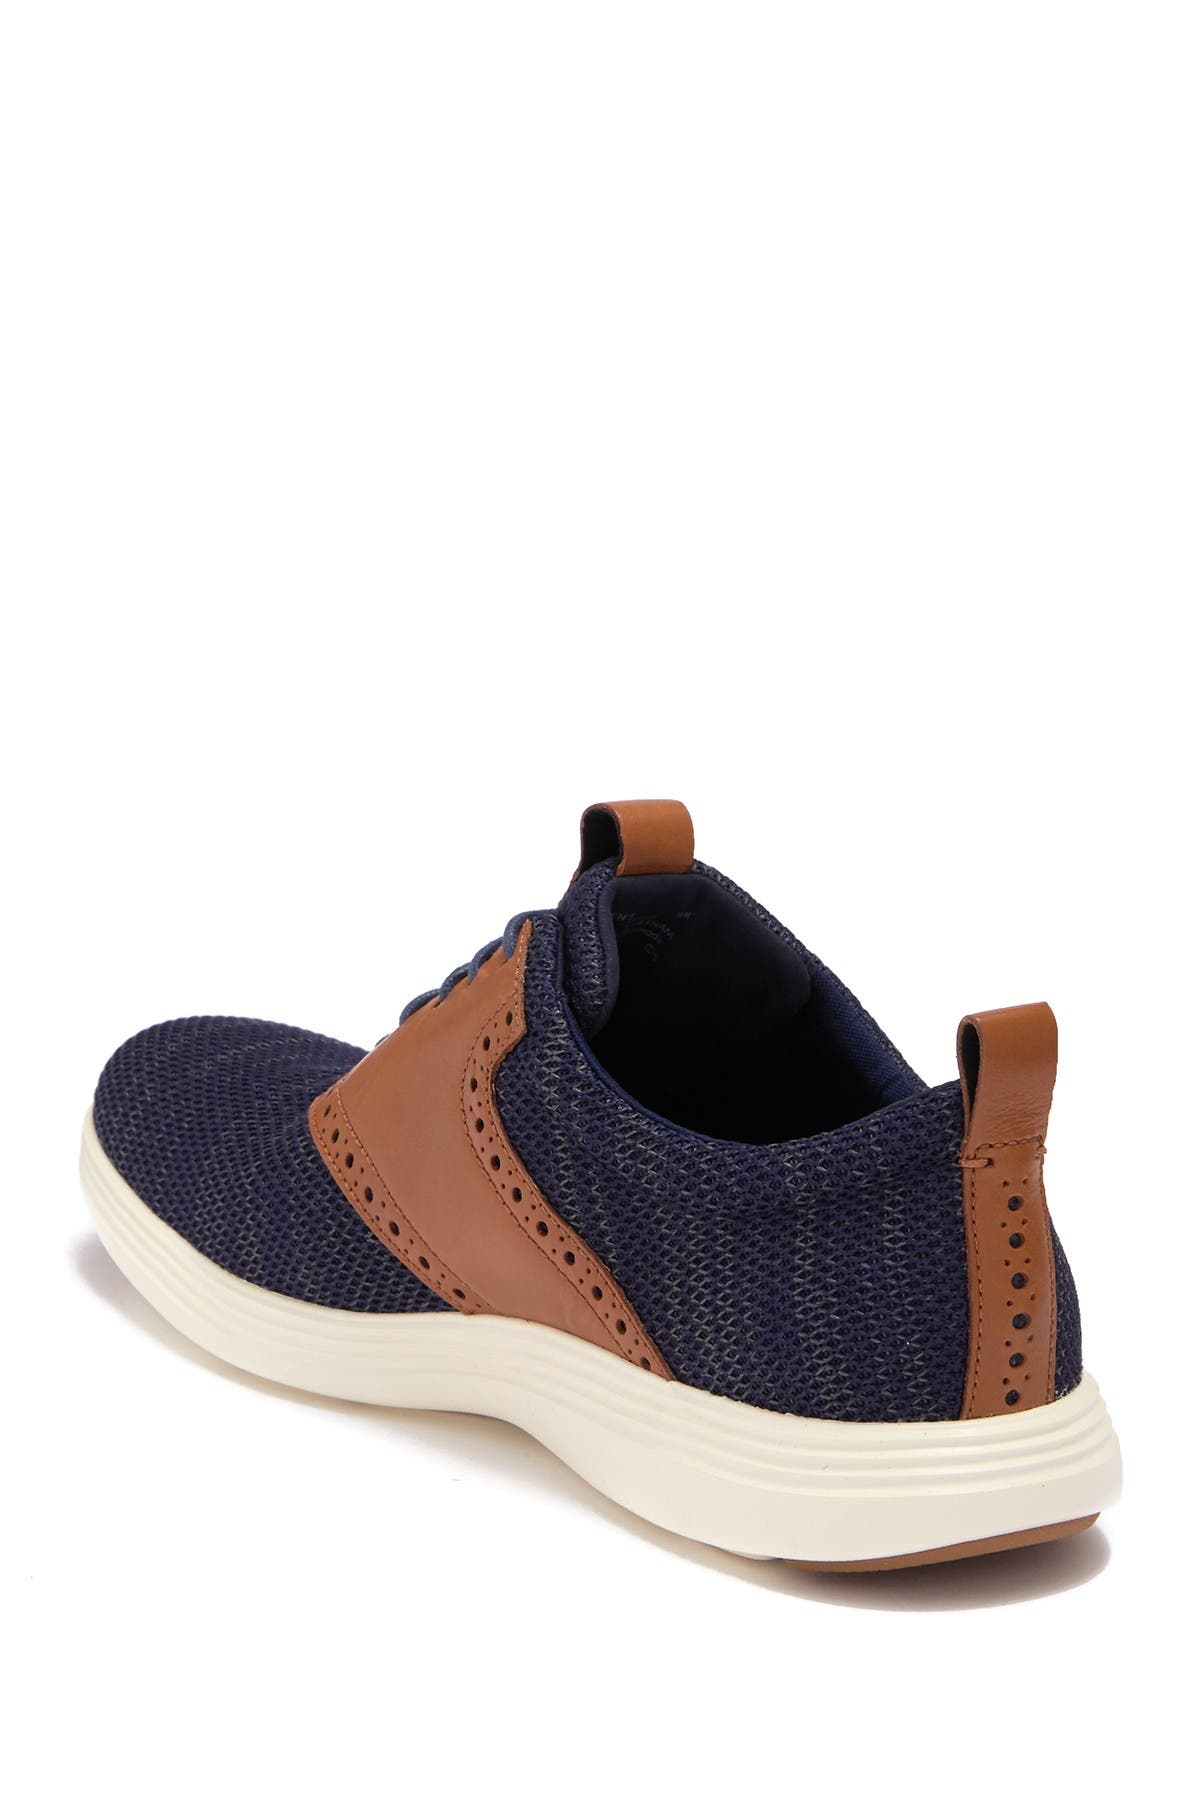 cole haan grand tour knit